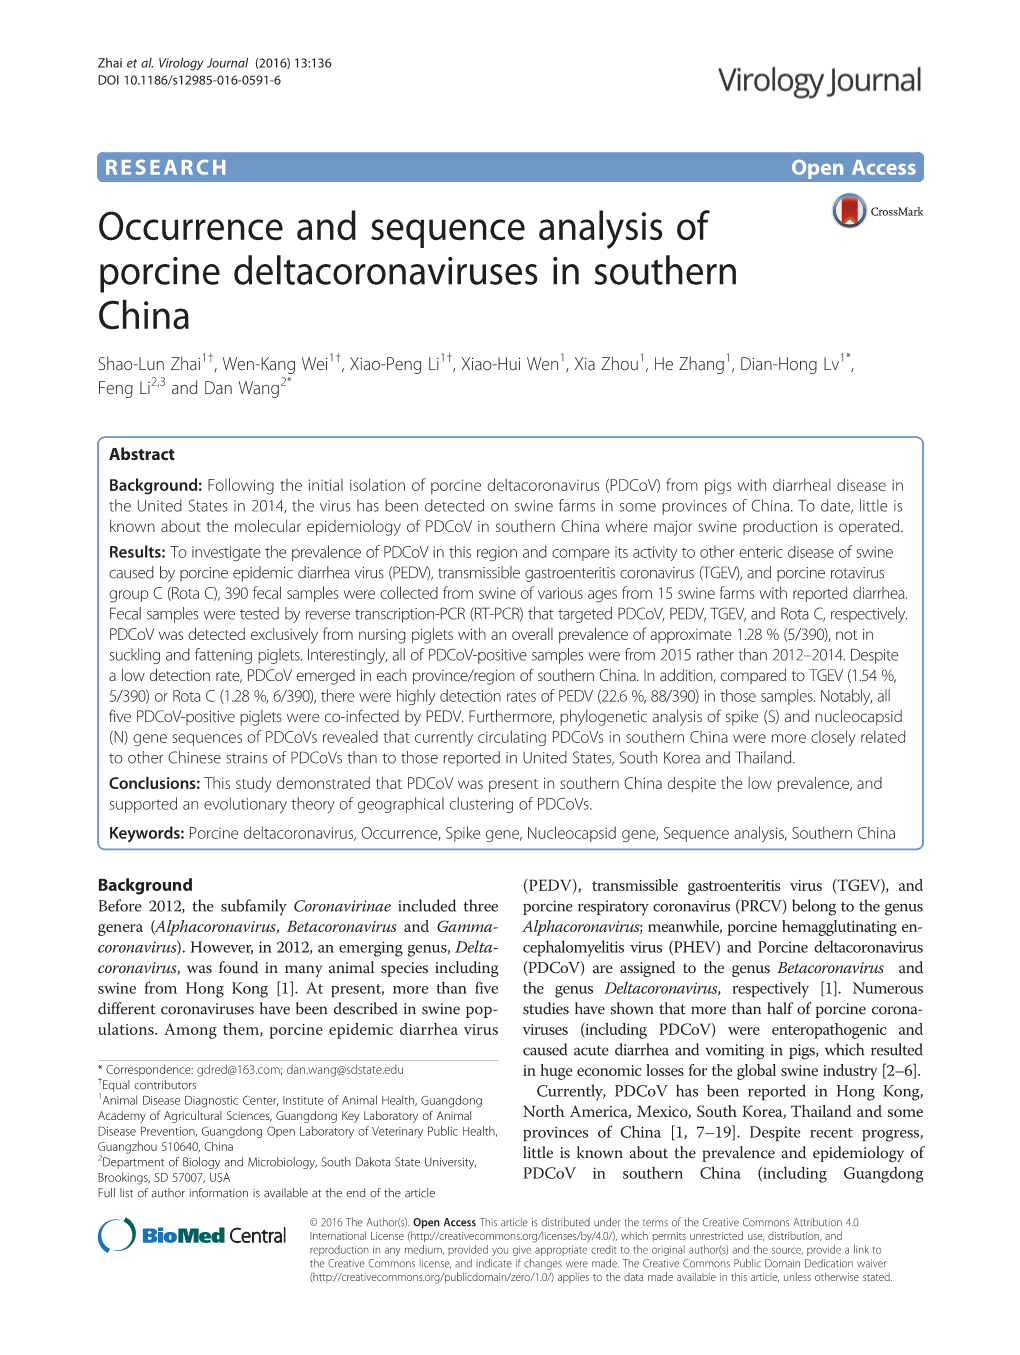 Occurrence and Sequence Analysis of Porcine Deltacoronaviruses In